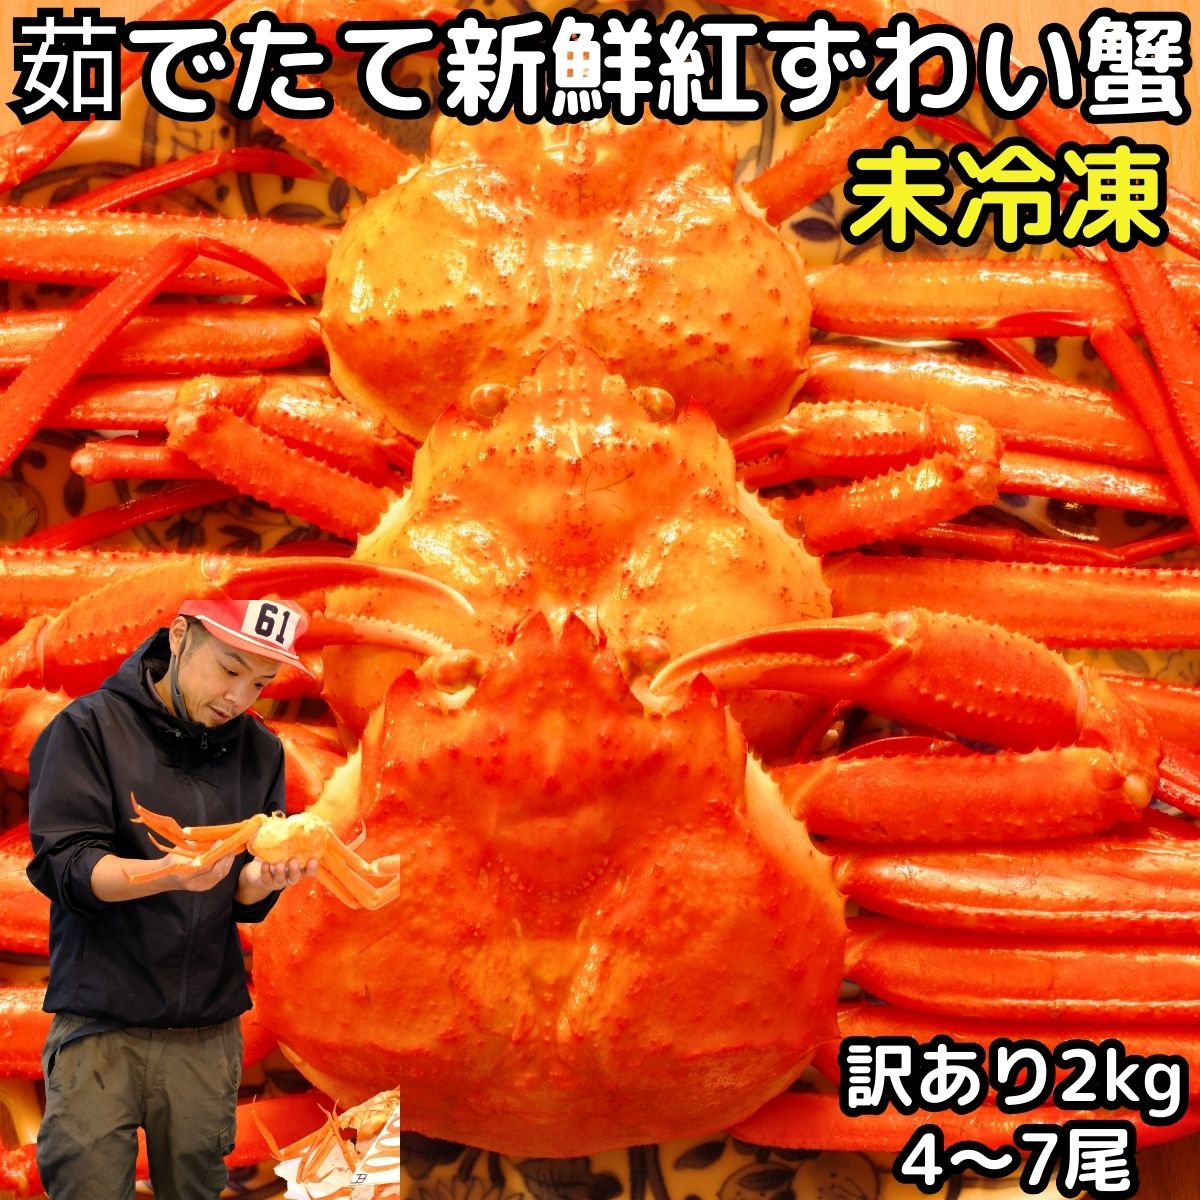  crab with translation ...... approximately 2kg 4~7 tail large ~ small mixing not yet freezing water .. that day shipping ... feeling . fresh Boyle . domestic production Tottori .. direct delivery crab . raw meal for 